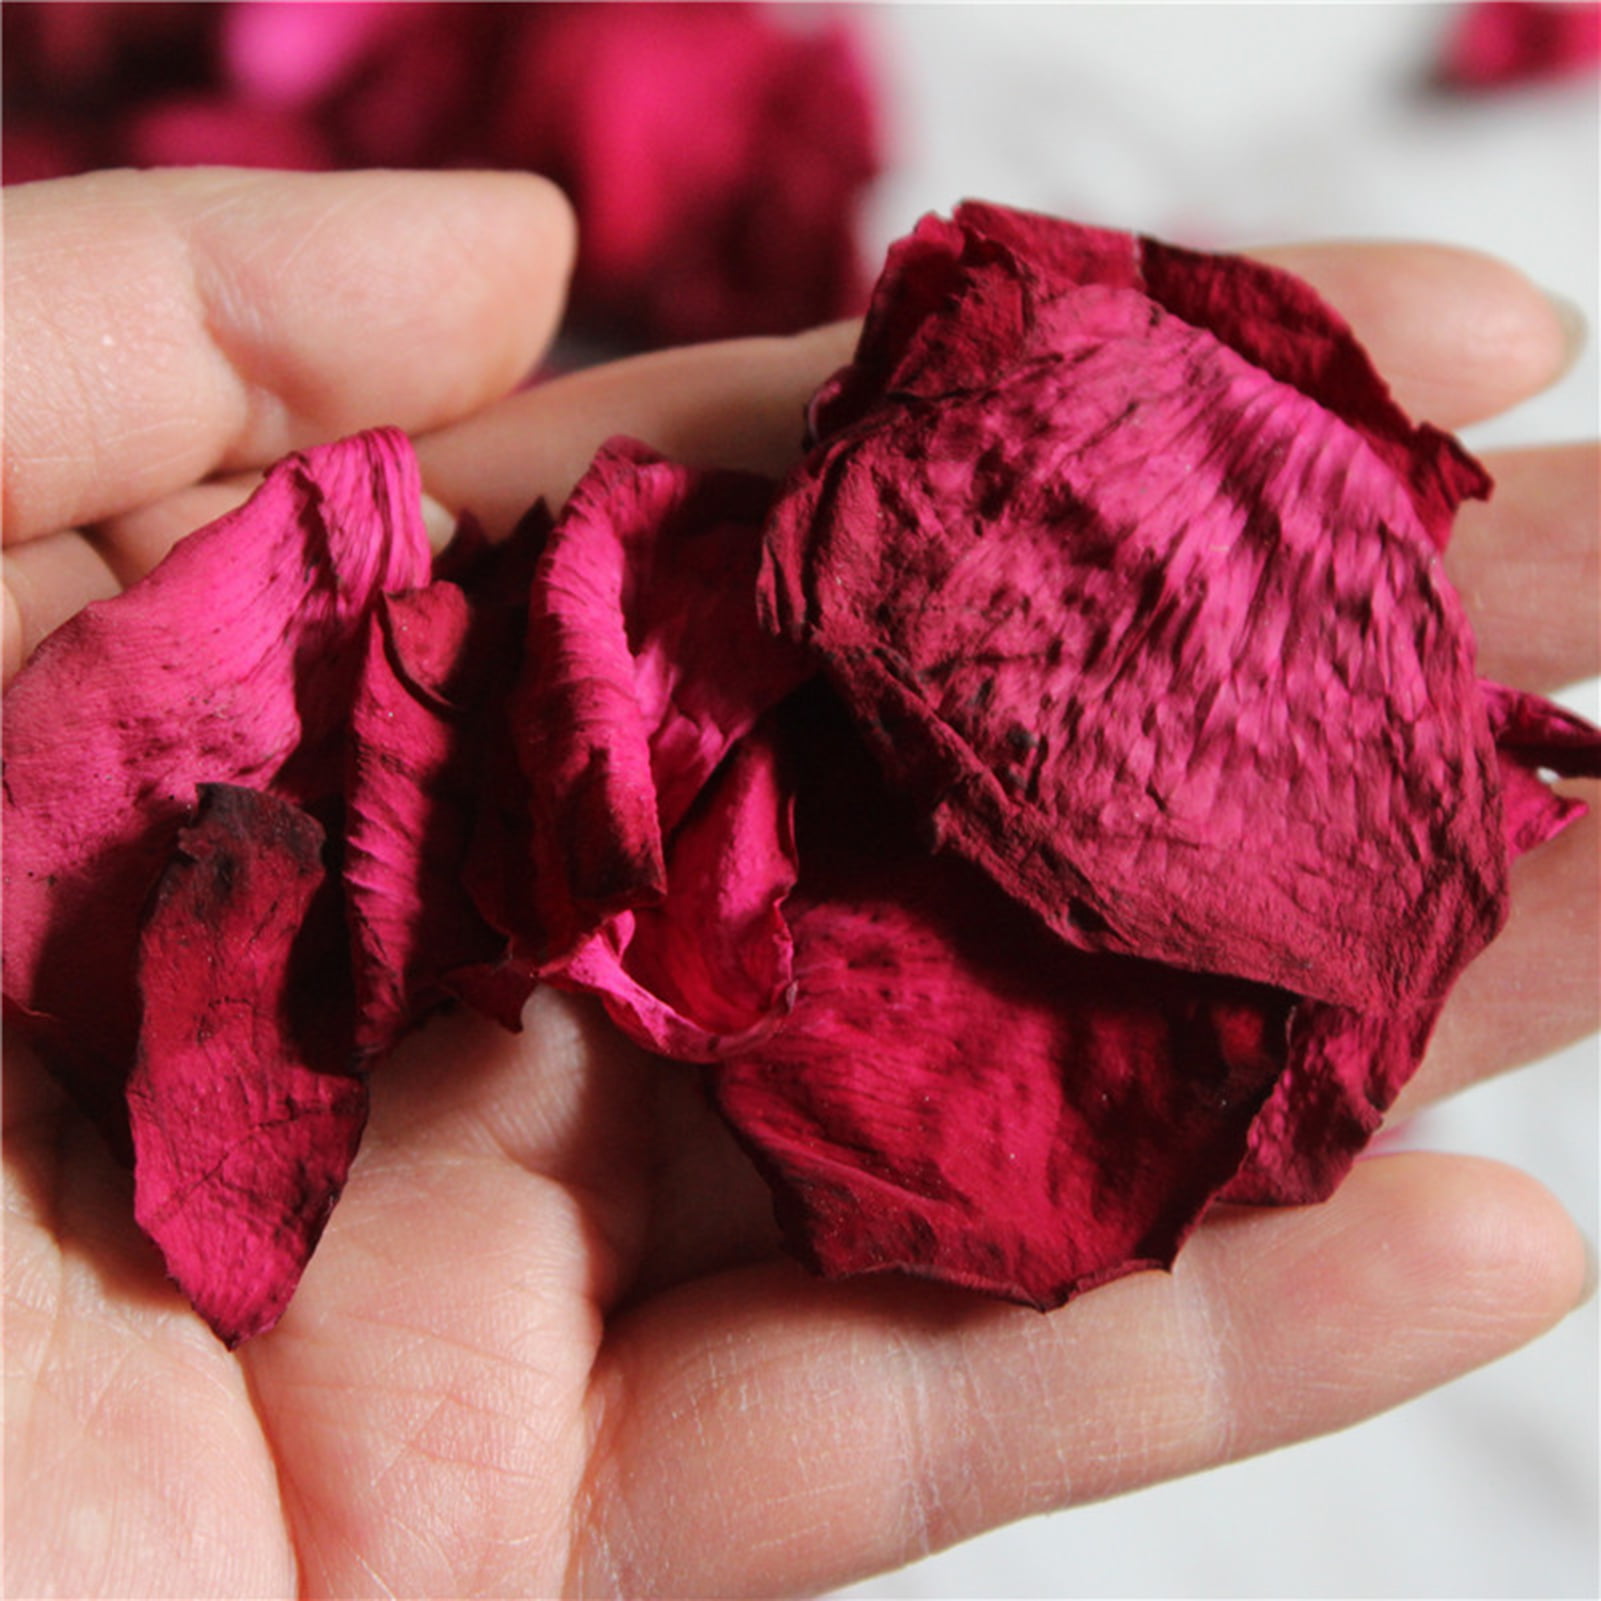 Limei 20g Natural Dried Rose Petals Real Flower Dry Red Rose Petal for Foot Bath Body Bath Spa Wedding Confetti Home Fragrance DIY Crafts Accessories